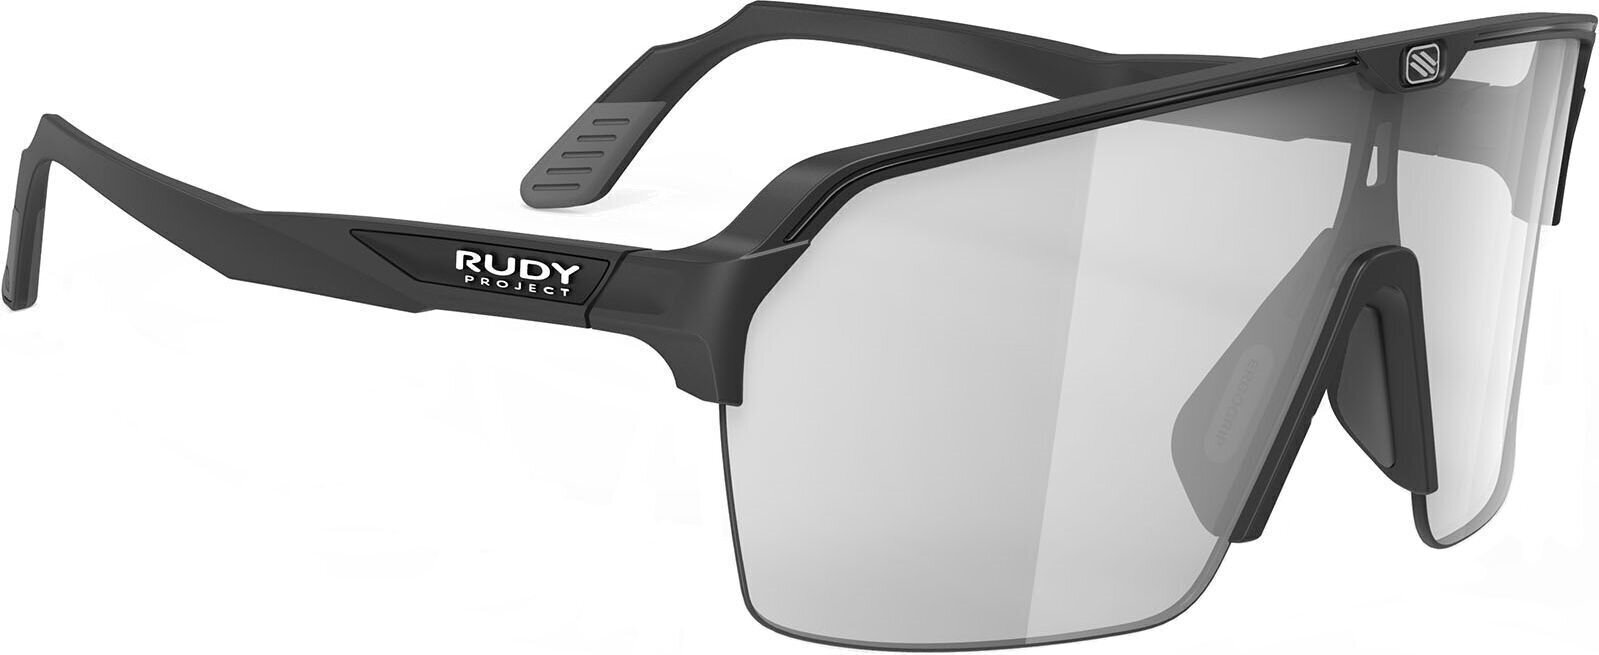 Lifestyle Glasses Rudy Project Spinshield Air Lifestyle Glasses